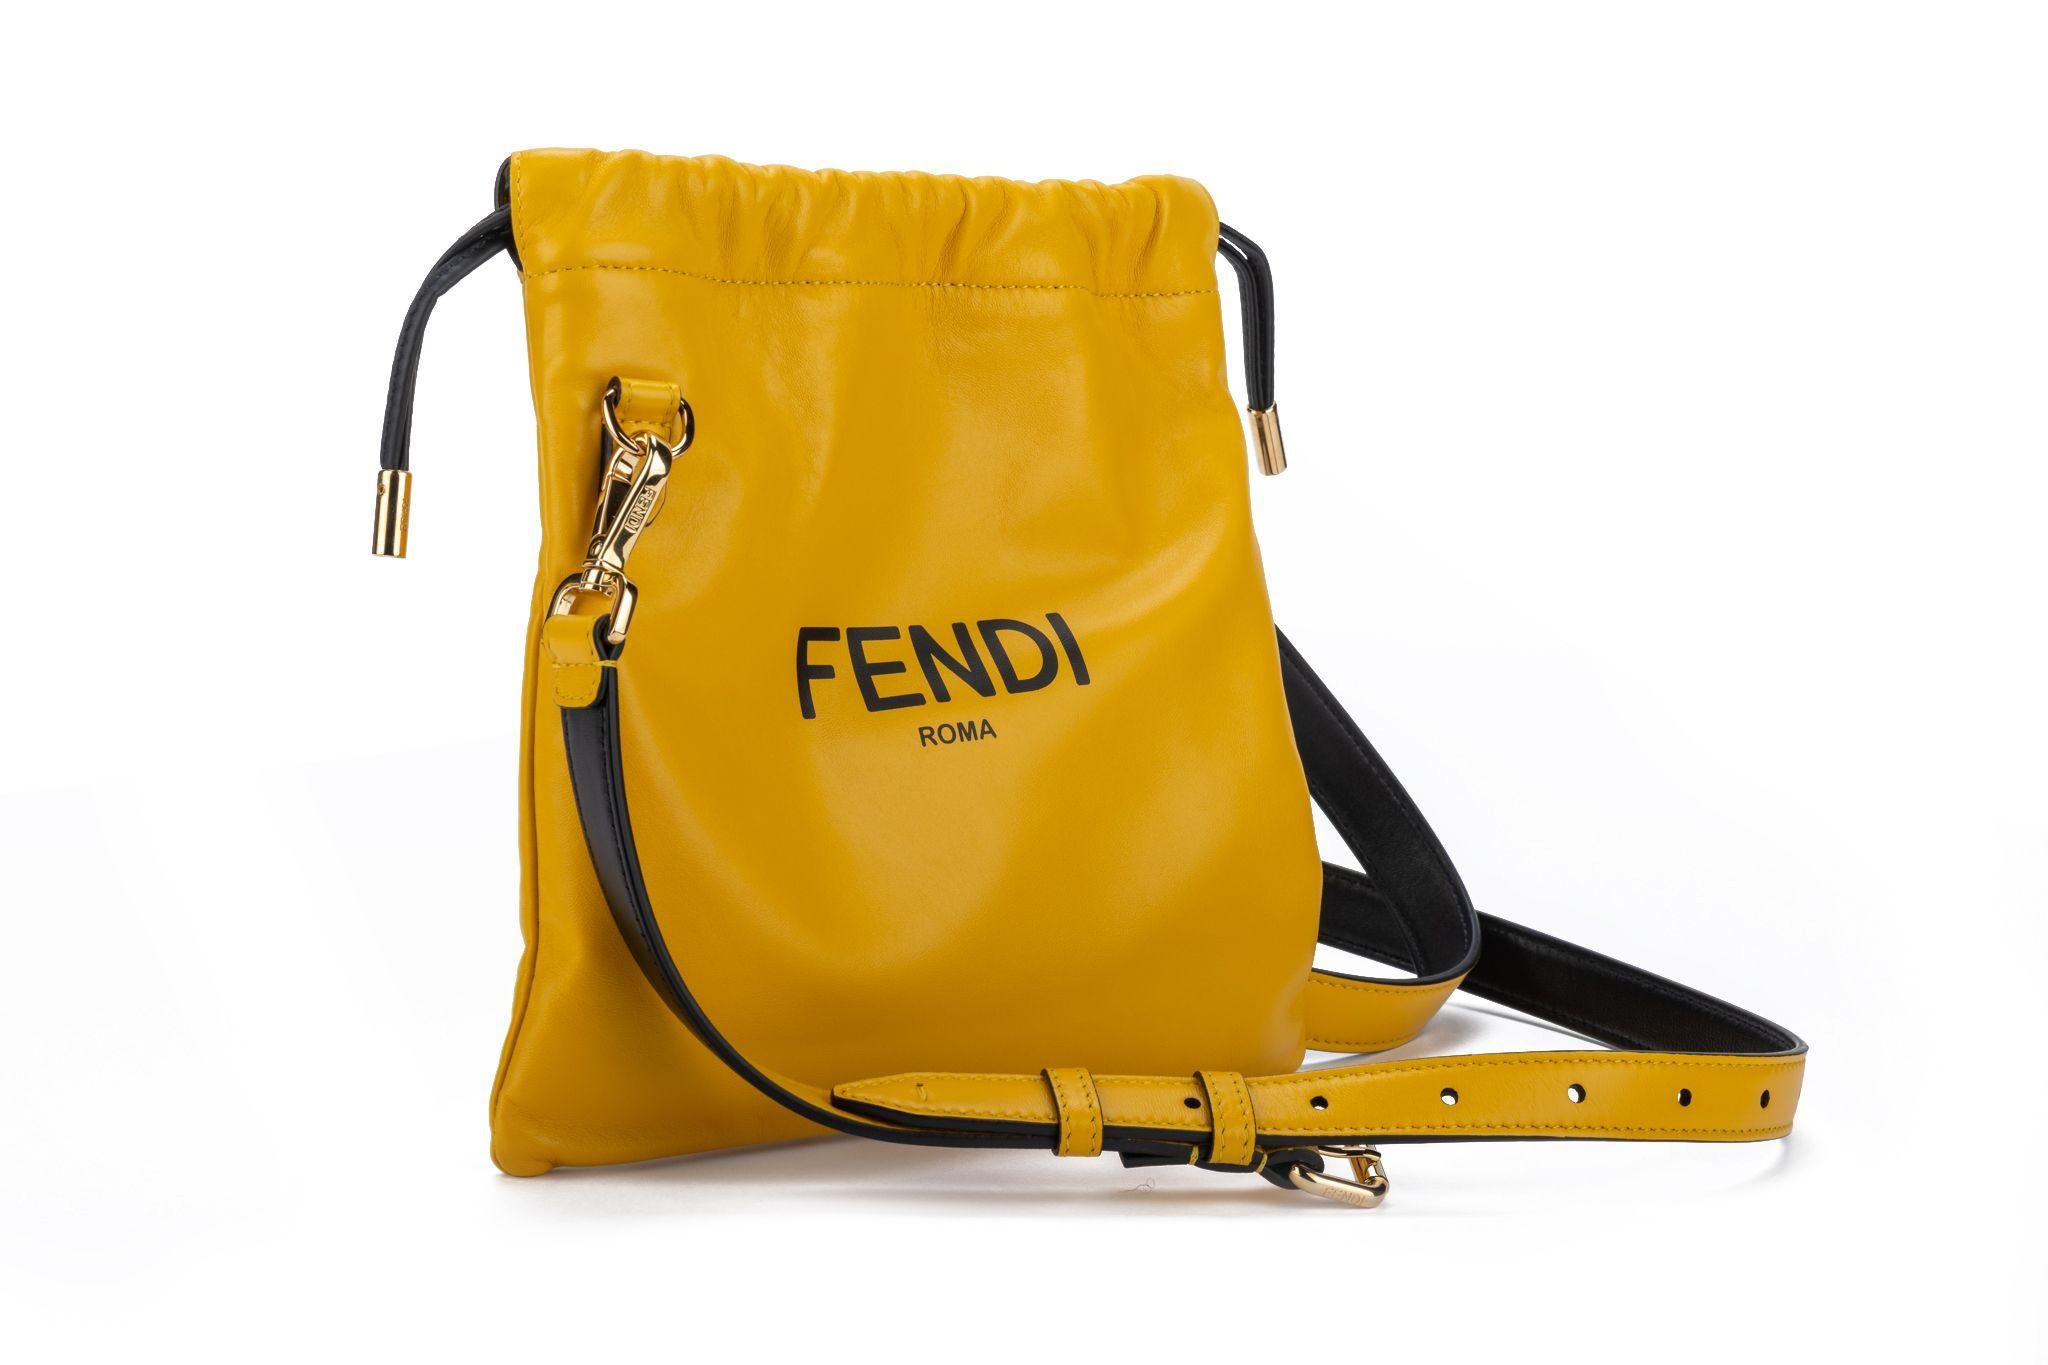 Fendi brand new small yellow lambskin cross body bag with black adn light gold details. 19 inches adjustable cross bod shoulder strap .Hardware in gold. Comes with booklet and dustcover.
